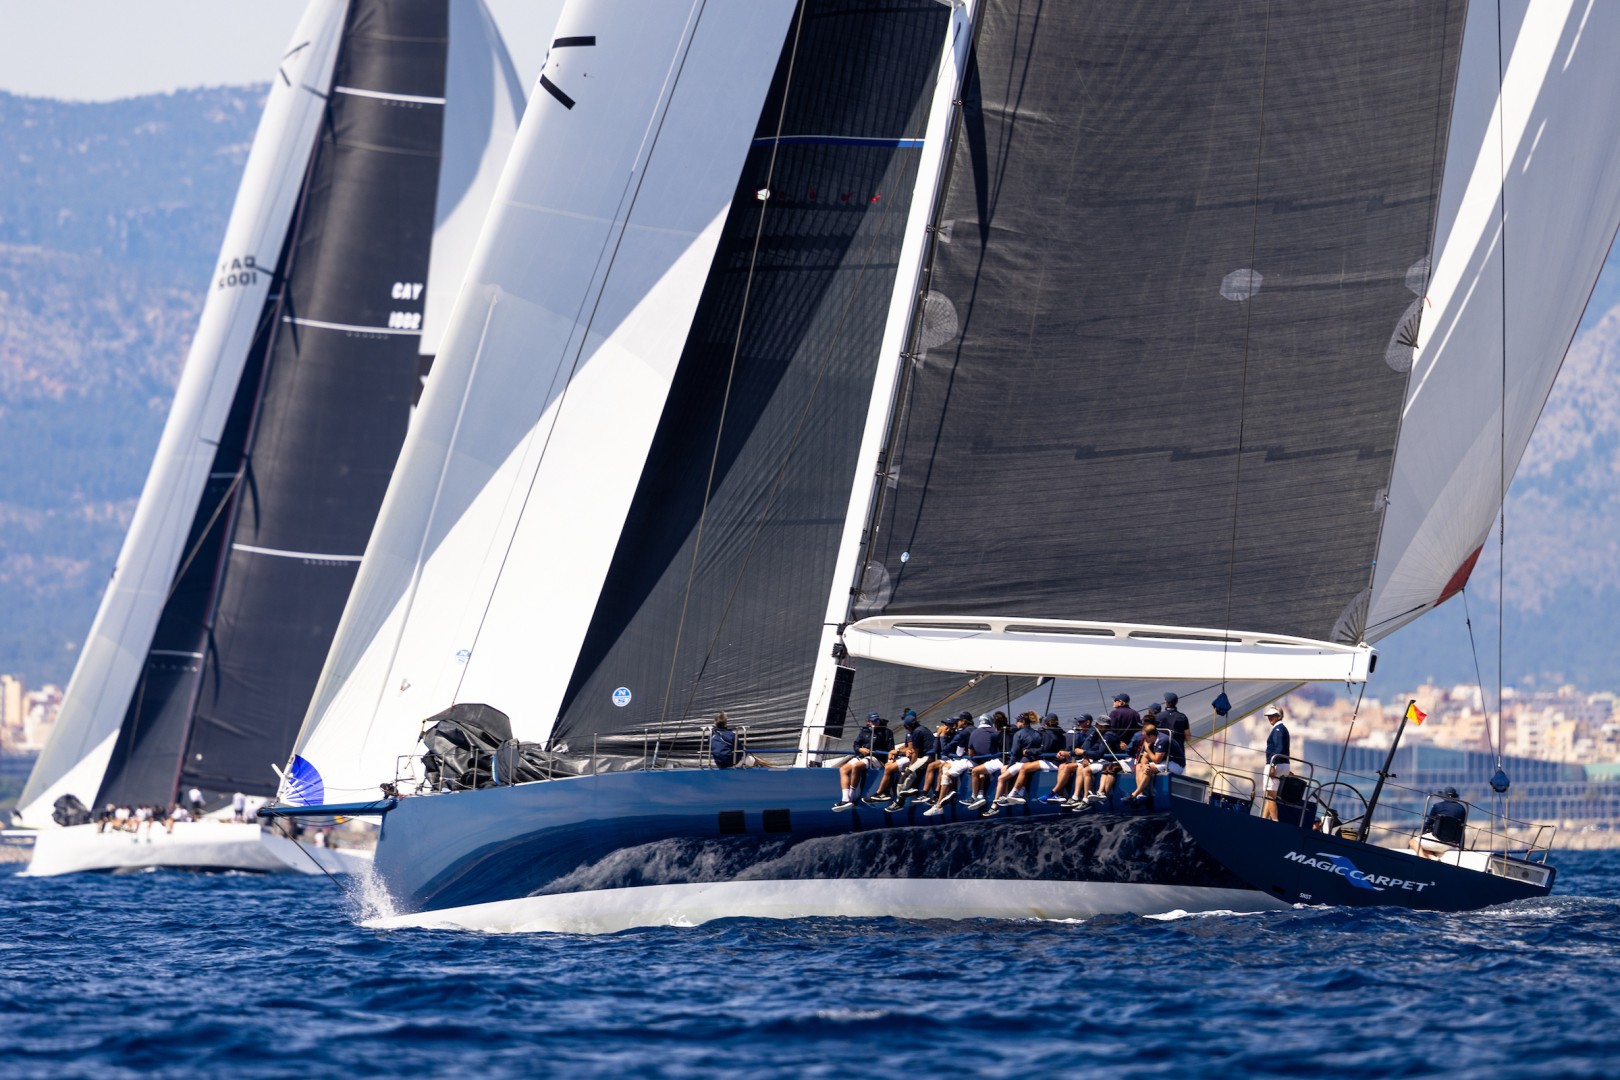 PalmaVela gets underway with day for the fastest and slowest maxis